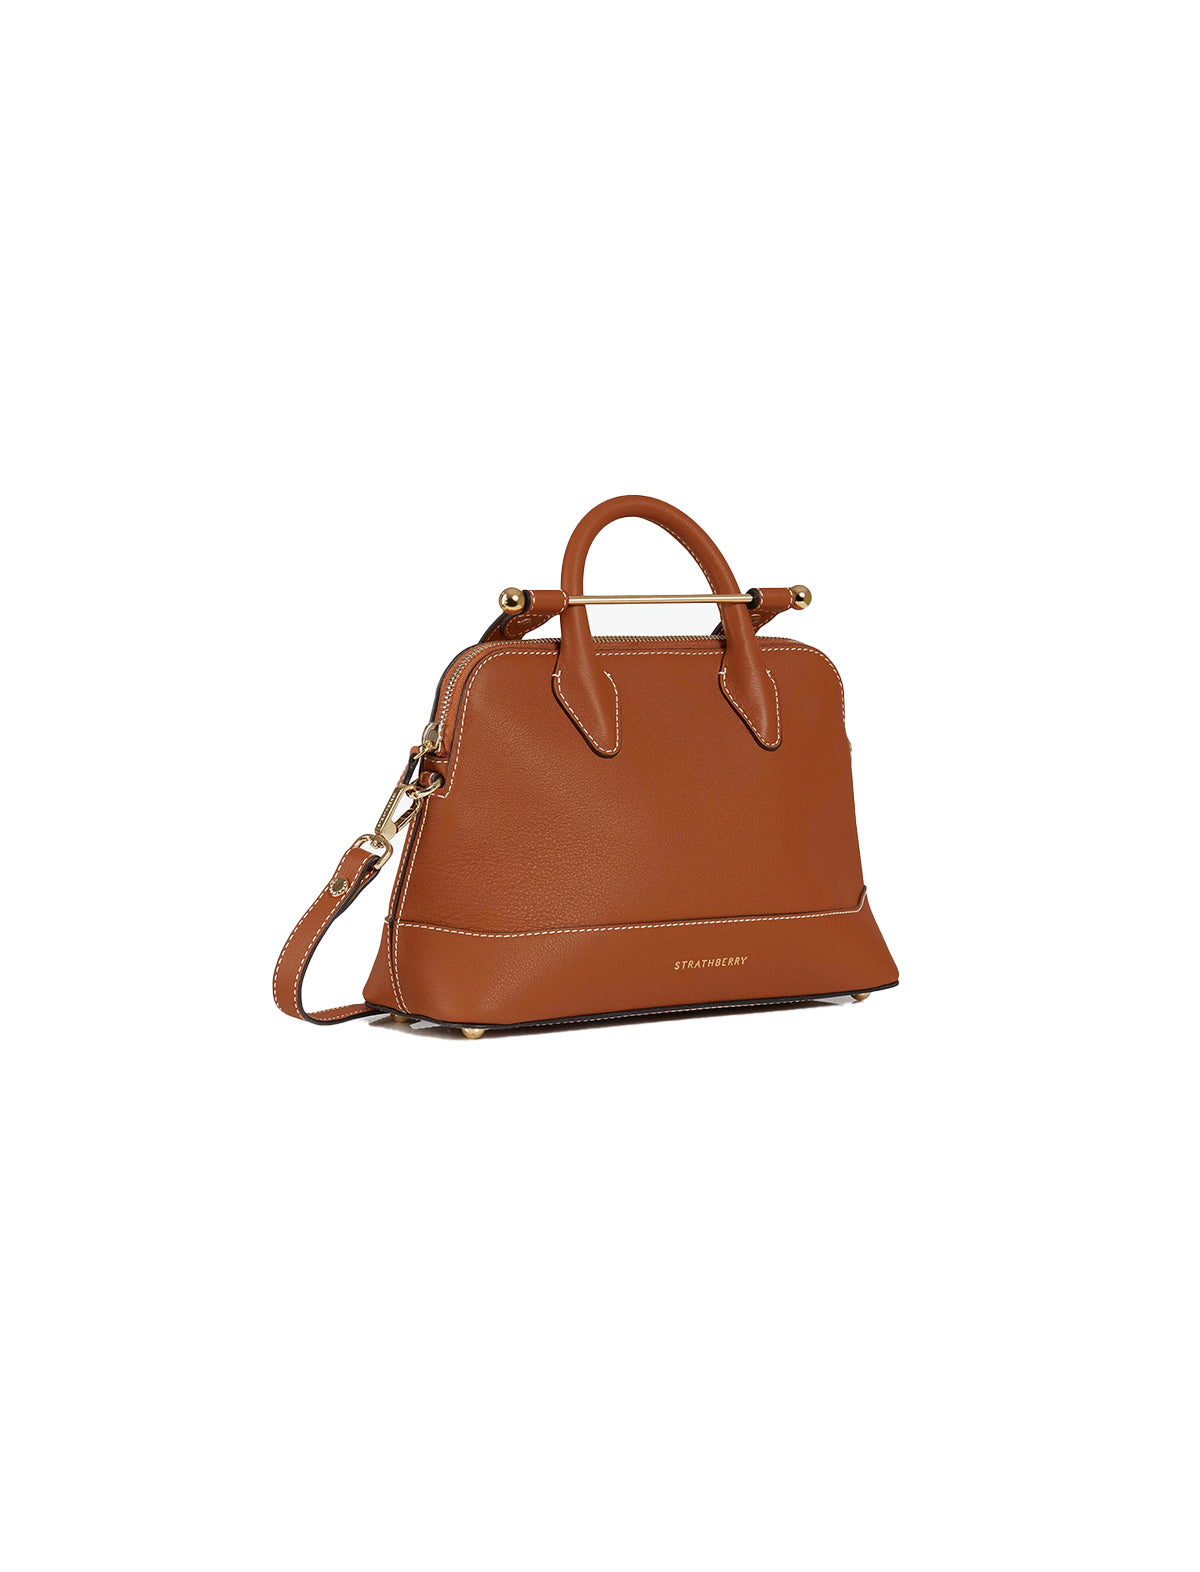 STRATHBERRY Dome Mini Bag in Chestnut